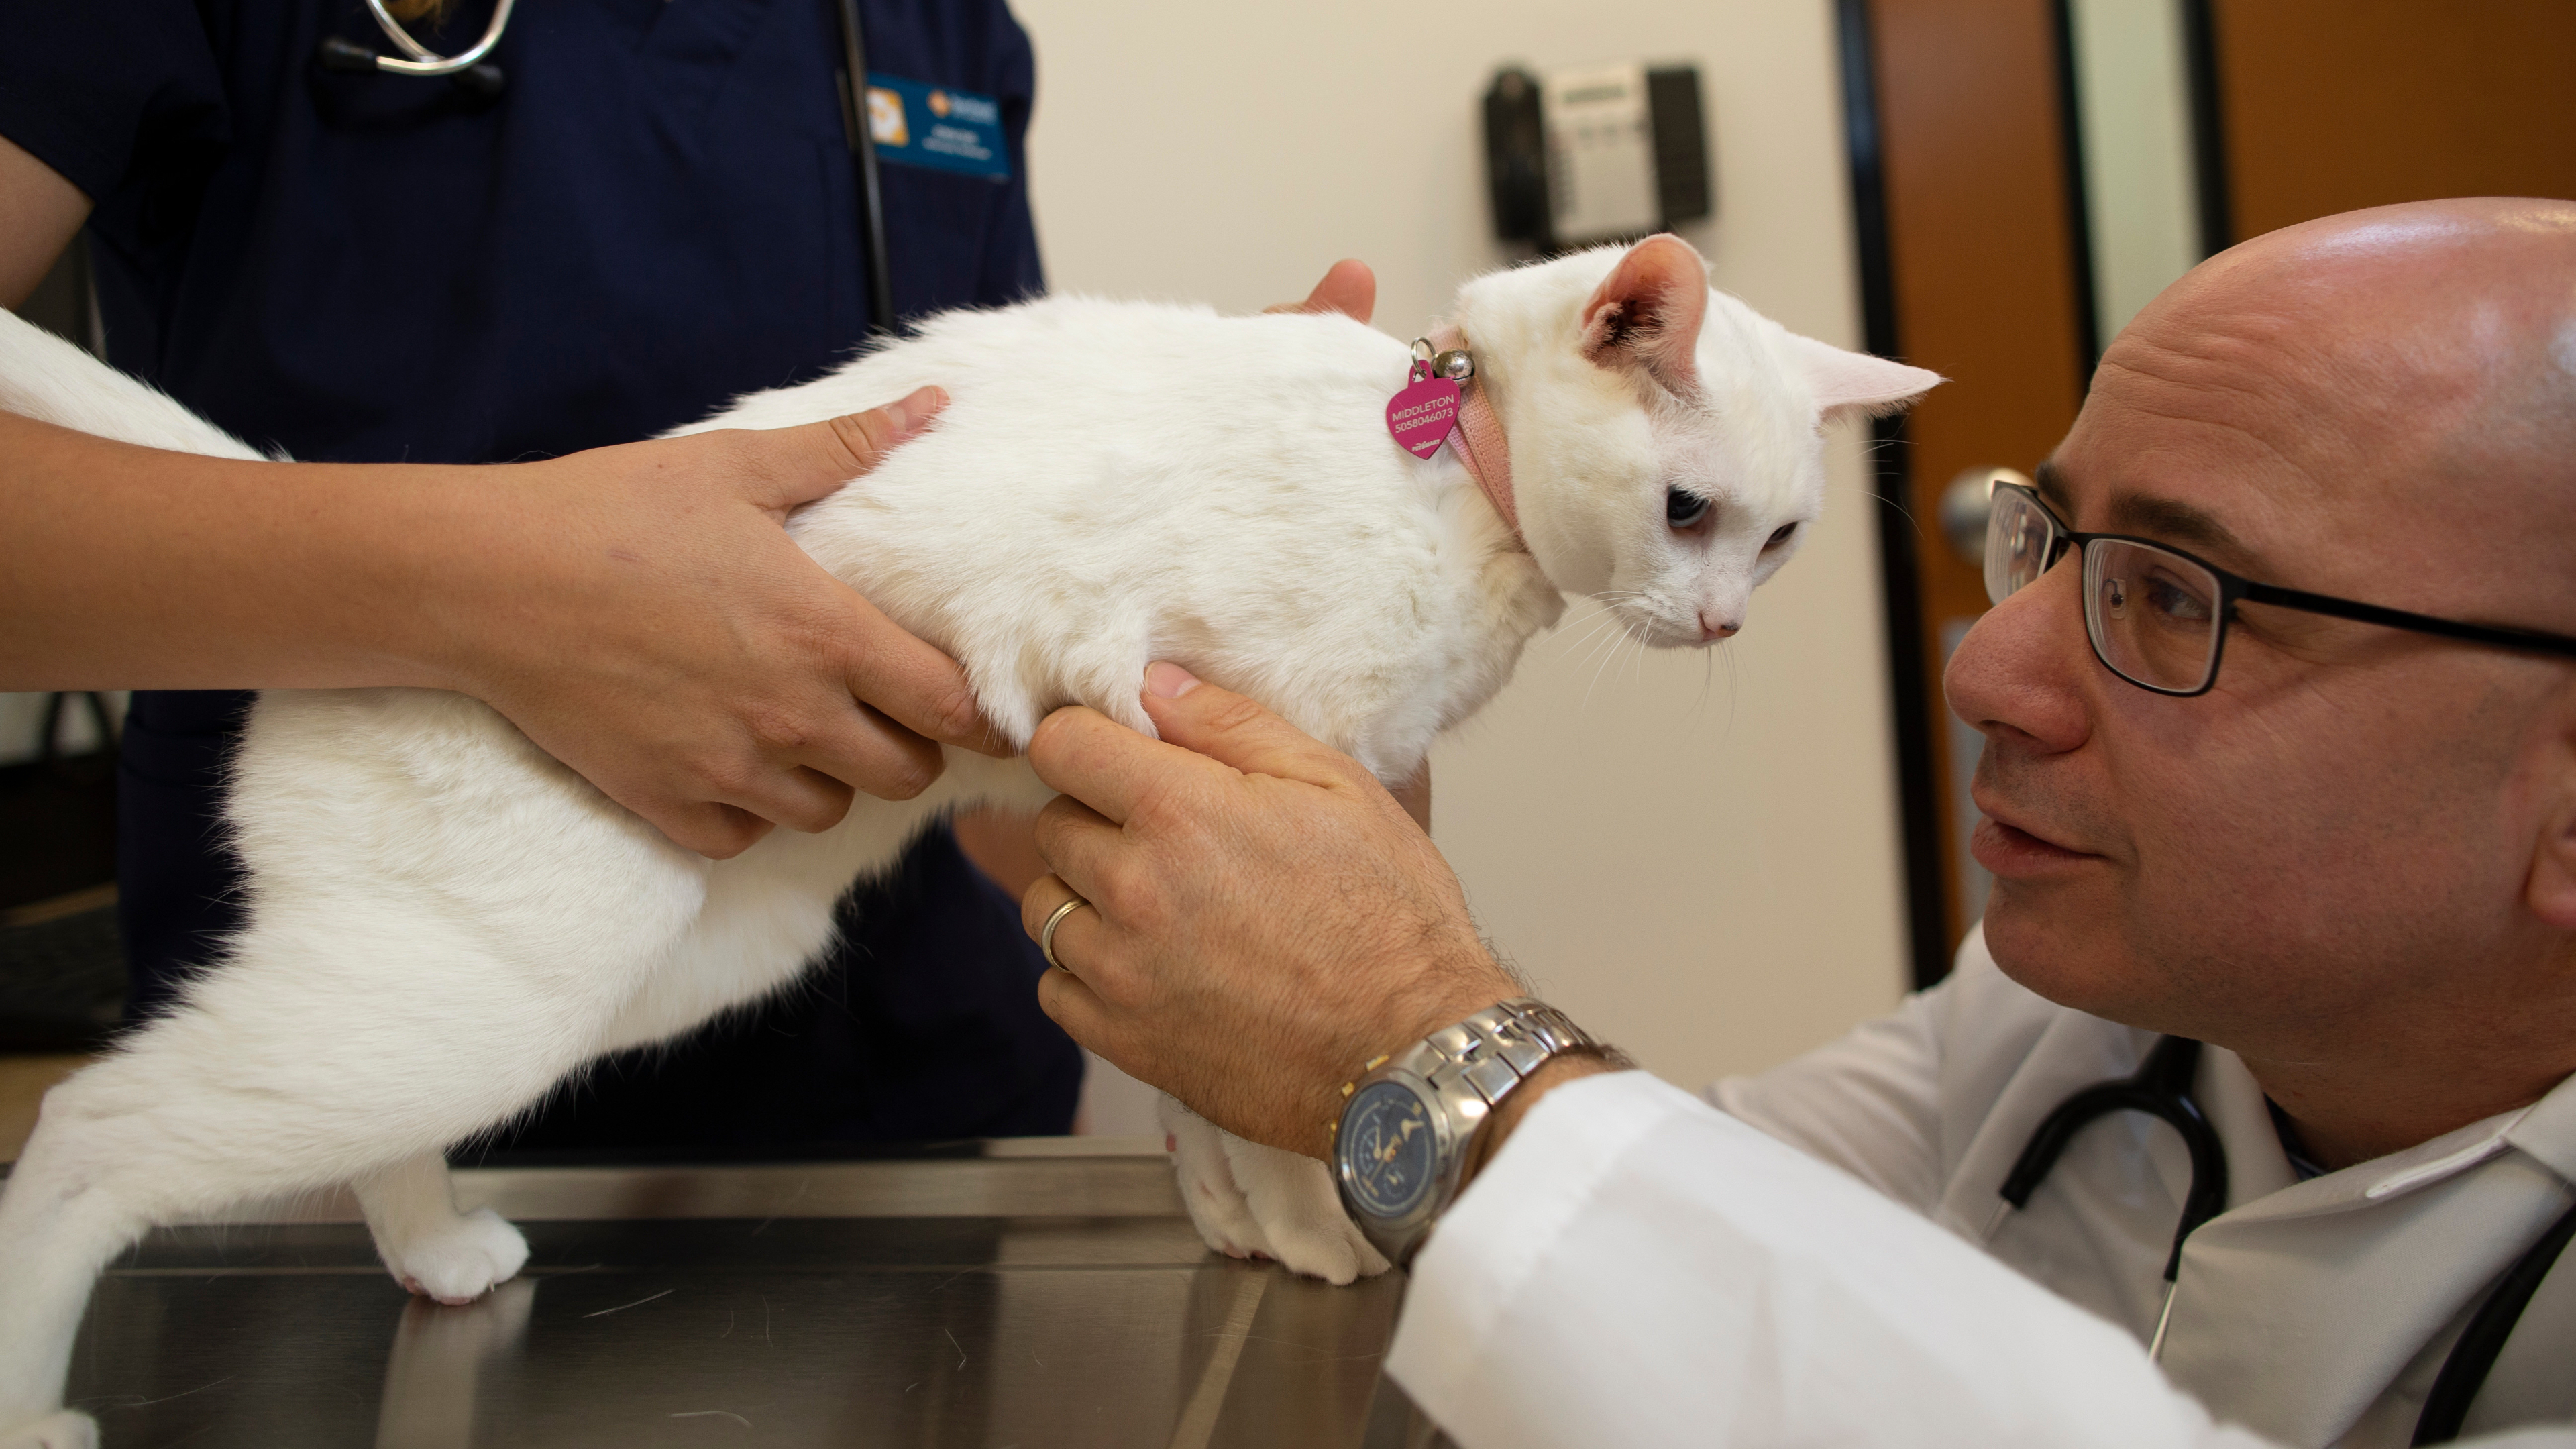 Veterinarian performing a checkup on a white cat